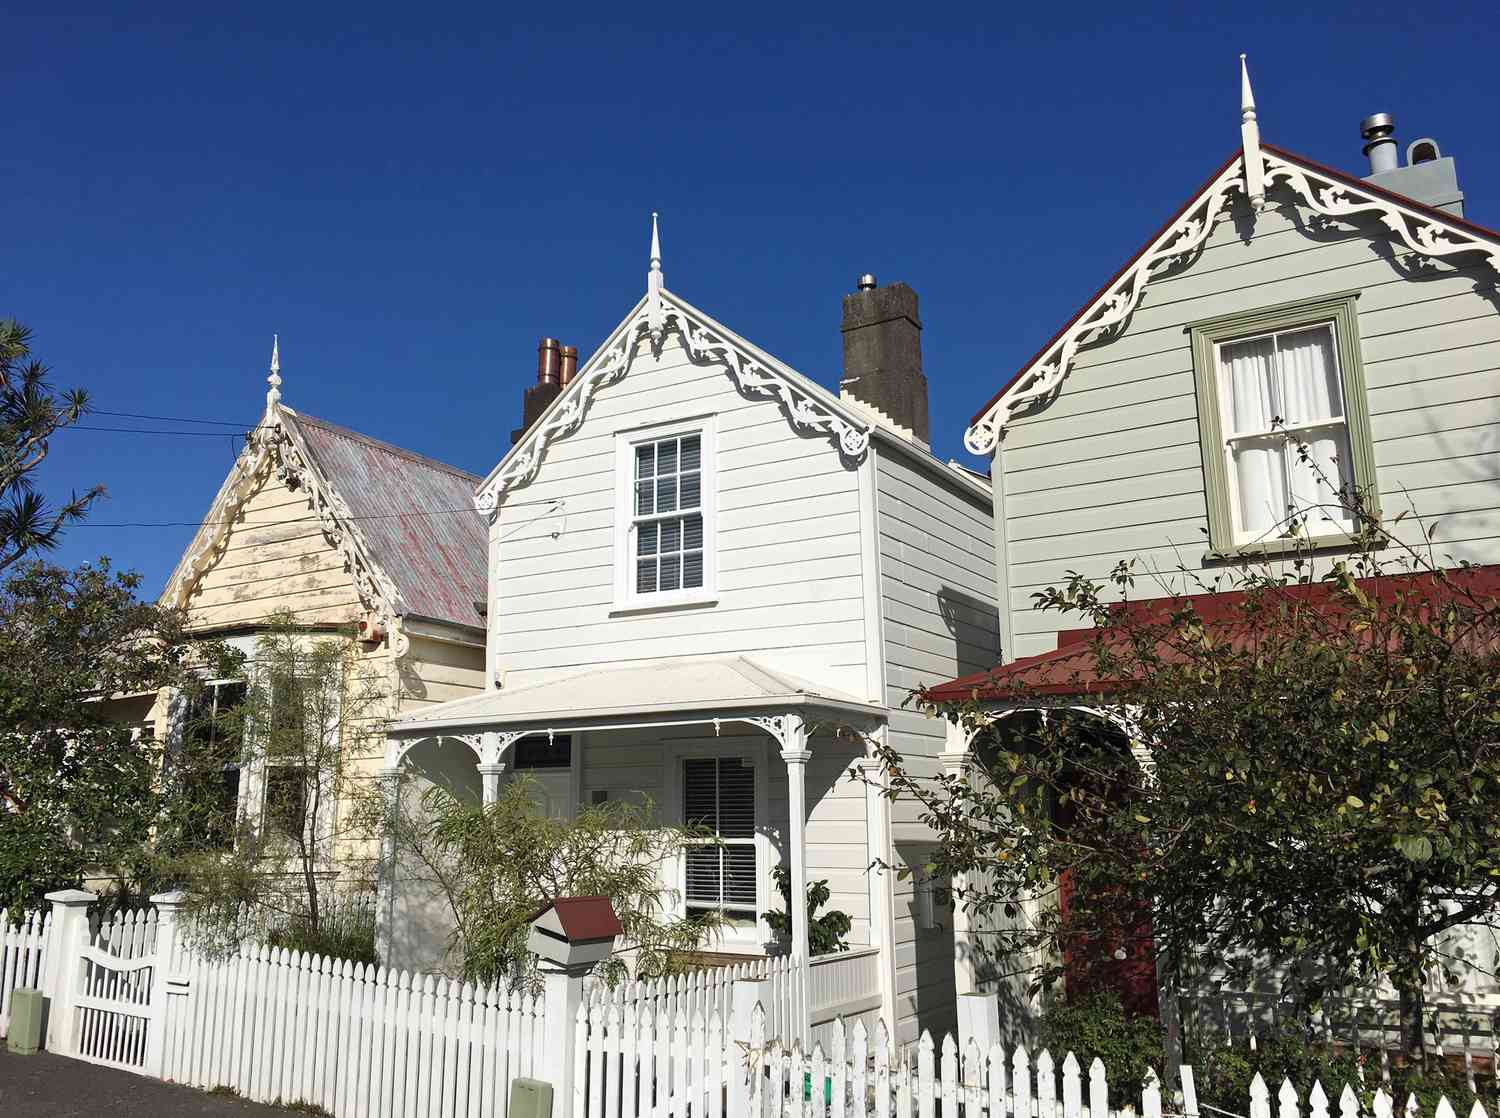 Victorian houses in Auckland New Zealand.